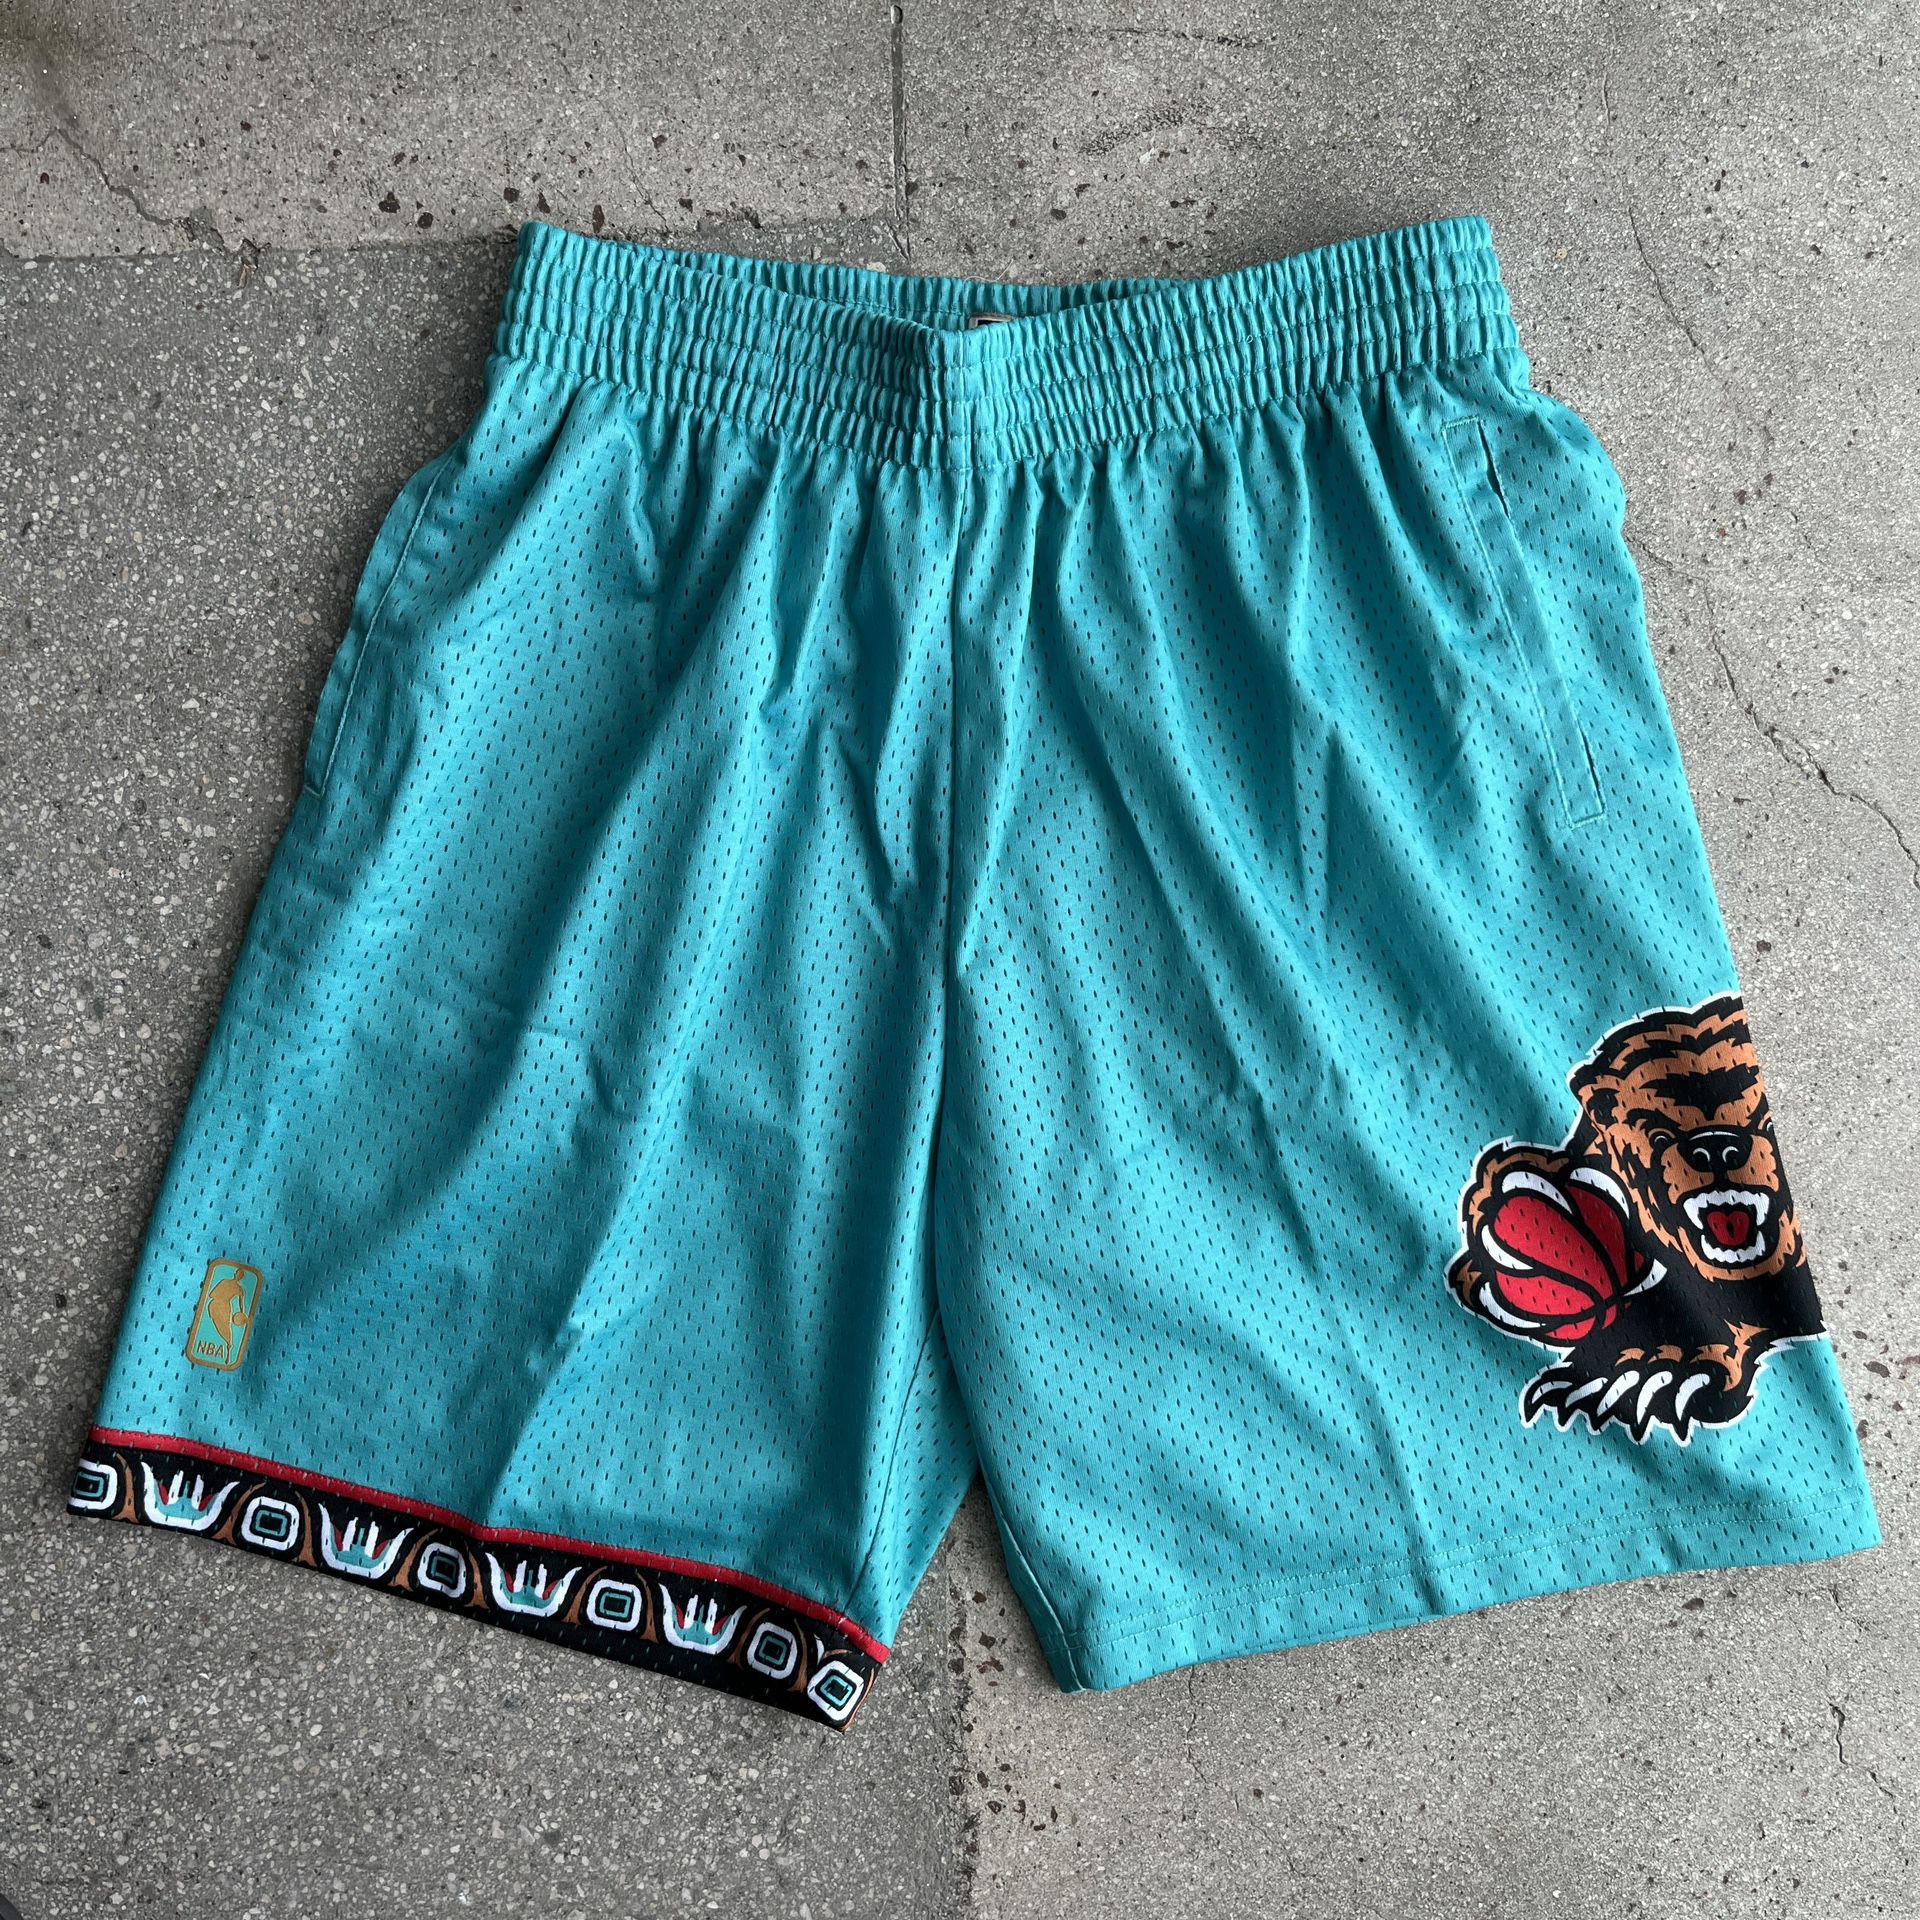 Shop Mitchell & Ness Vancouver Grizzlies 1996 Road Swingman Shorts  SMSHGS18259-VGRTEAL96 blue